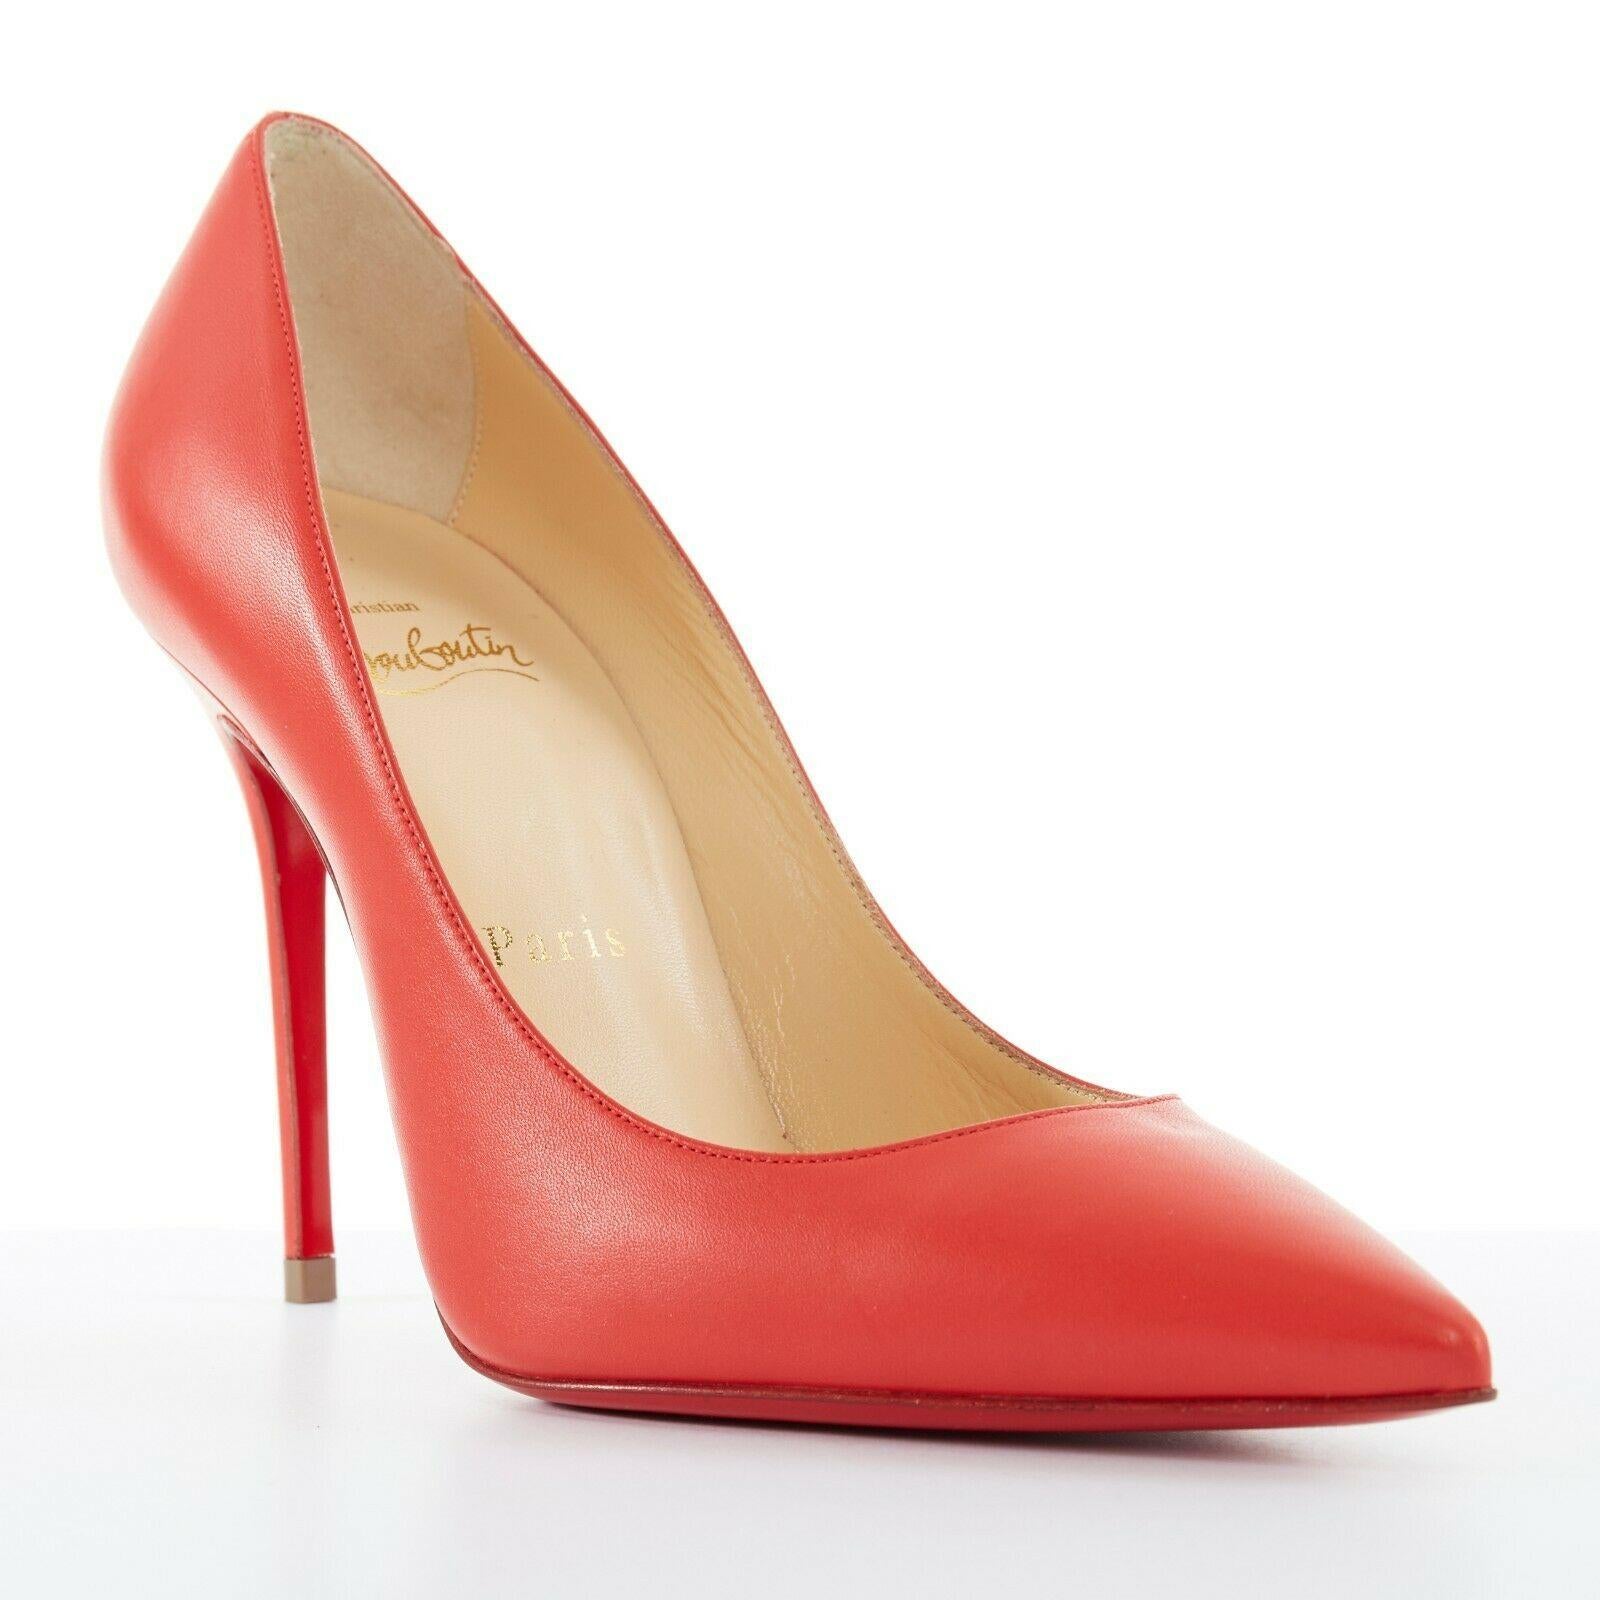 new CHRISTIAN LOUBOUTIN Decollete 100 red leather stiletto pigalle heel EU36
CHRISTIAN LOUBOUTIN
Decollete 100. Red calf leather upper. 
Pointed toe. Tonal stitching. Stiletto high heel. 
Signature Christian Louboutin red lacquered leather sole.